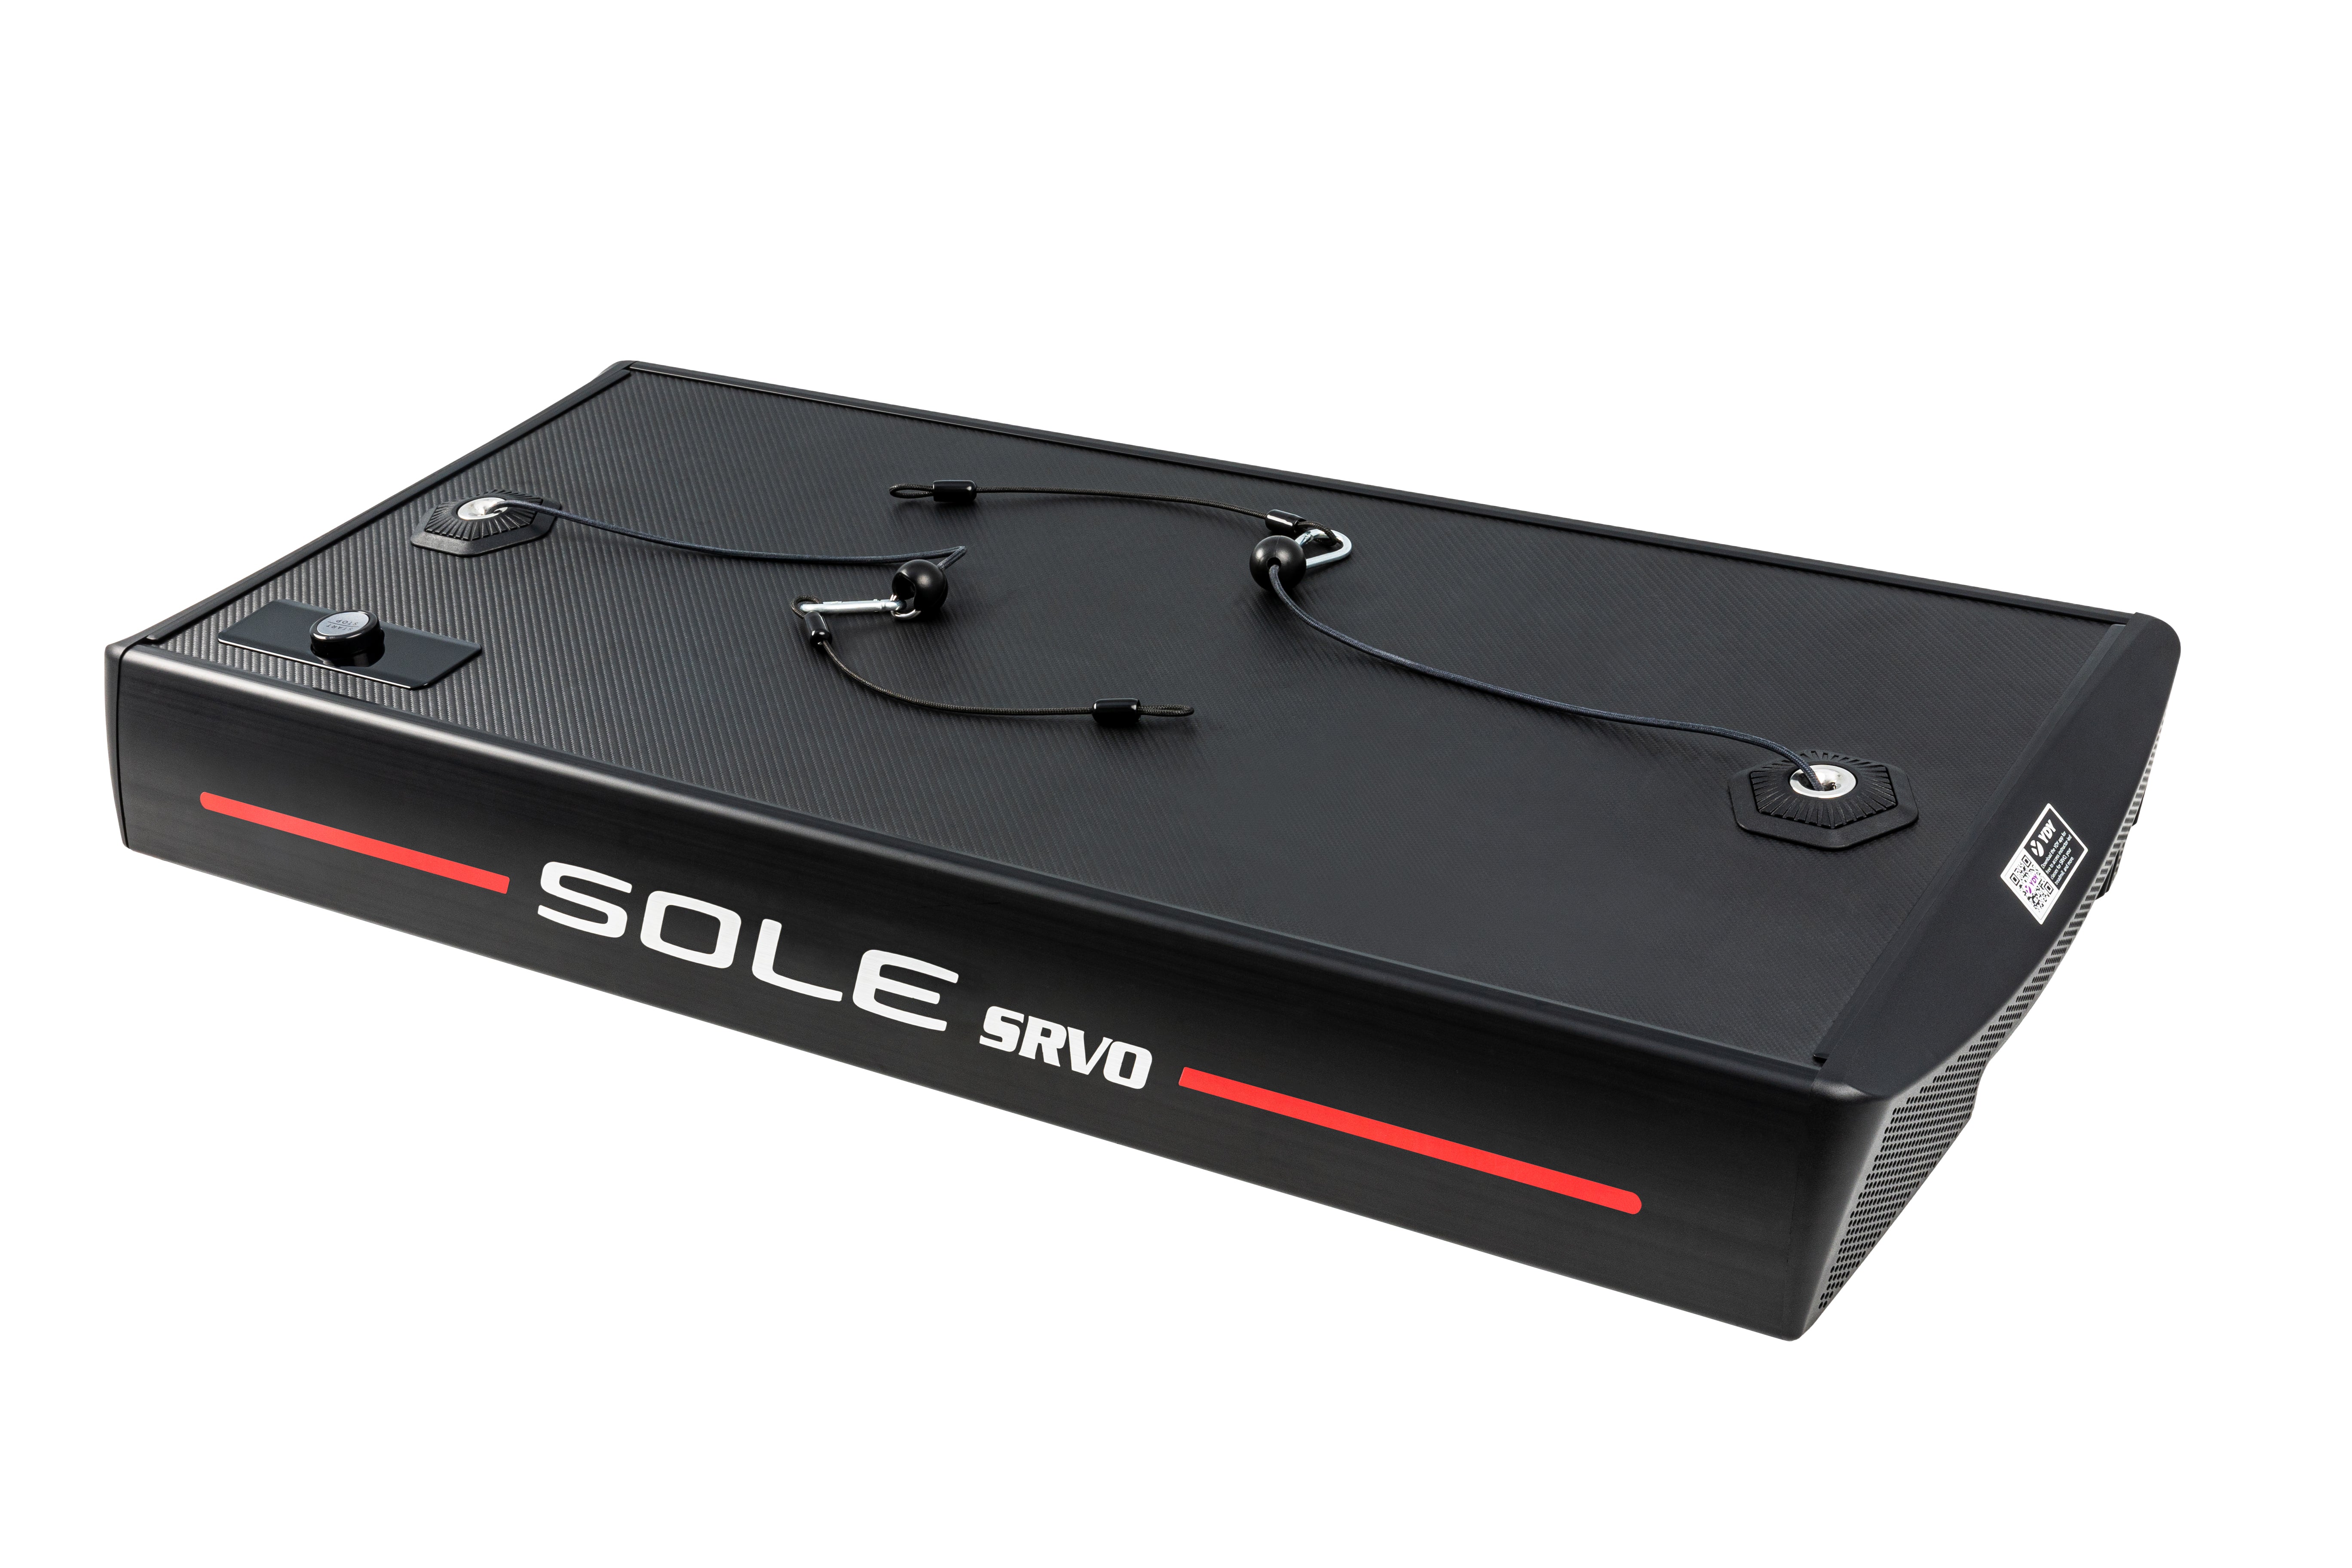 Side view of the Sole SRVO device displaying its black design, "SOLE SRVO" logo with a red stripe, and an extended retractable handle on top along with the cable extenders attached.